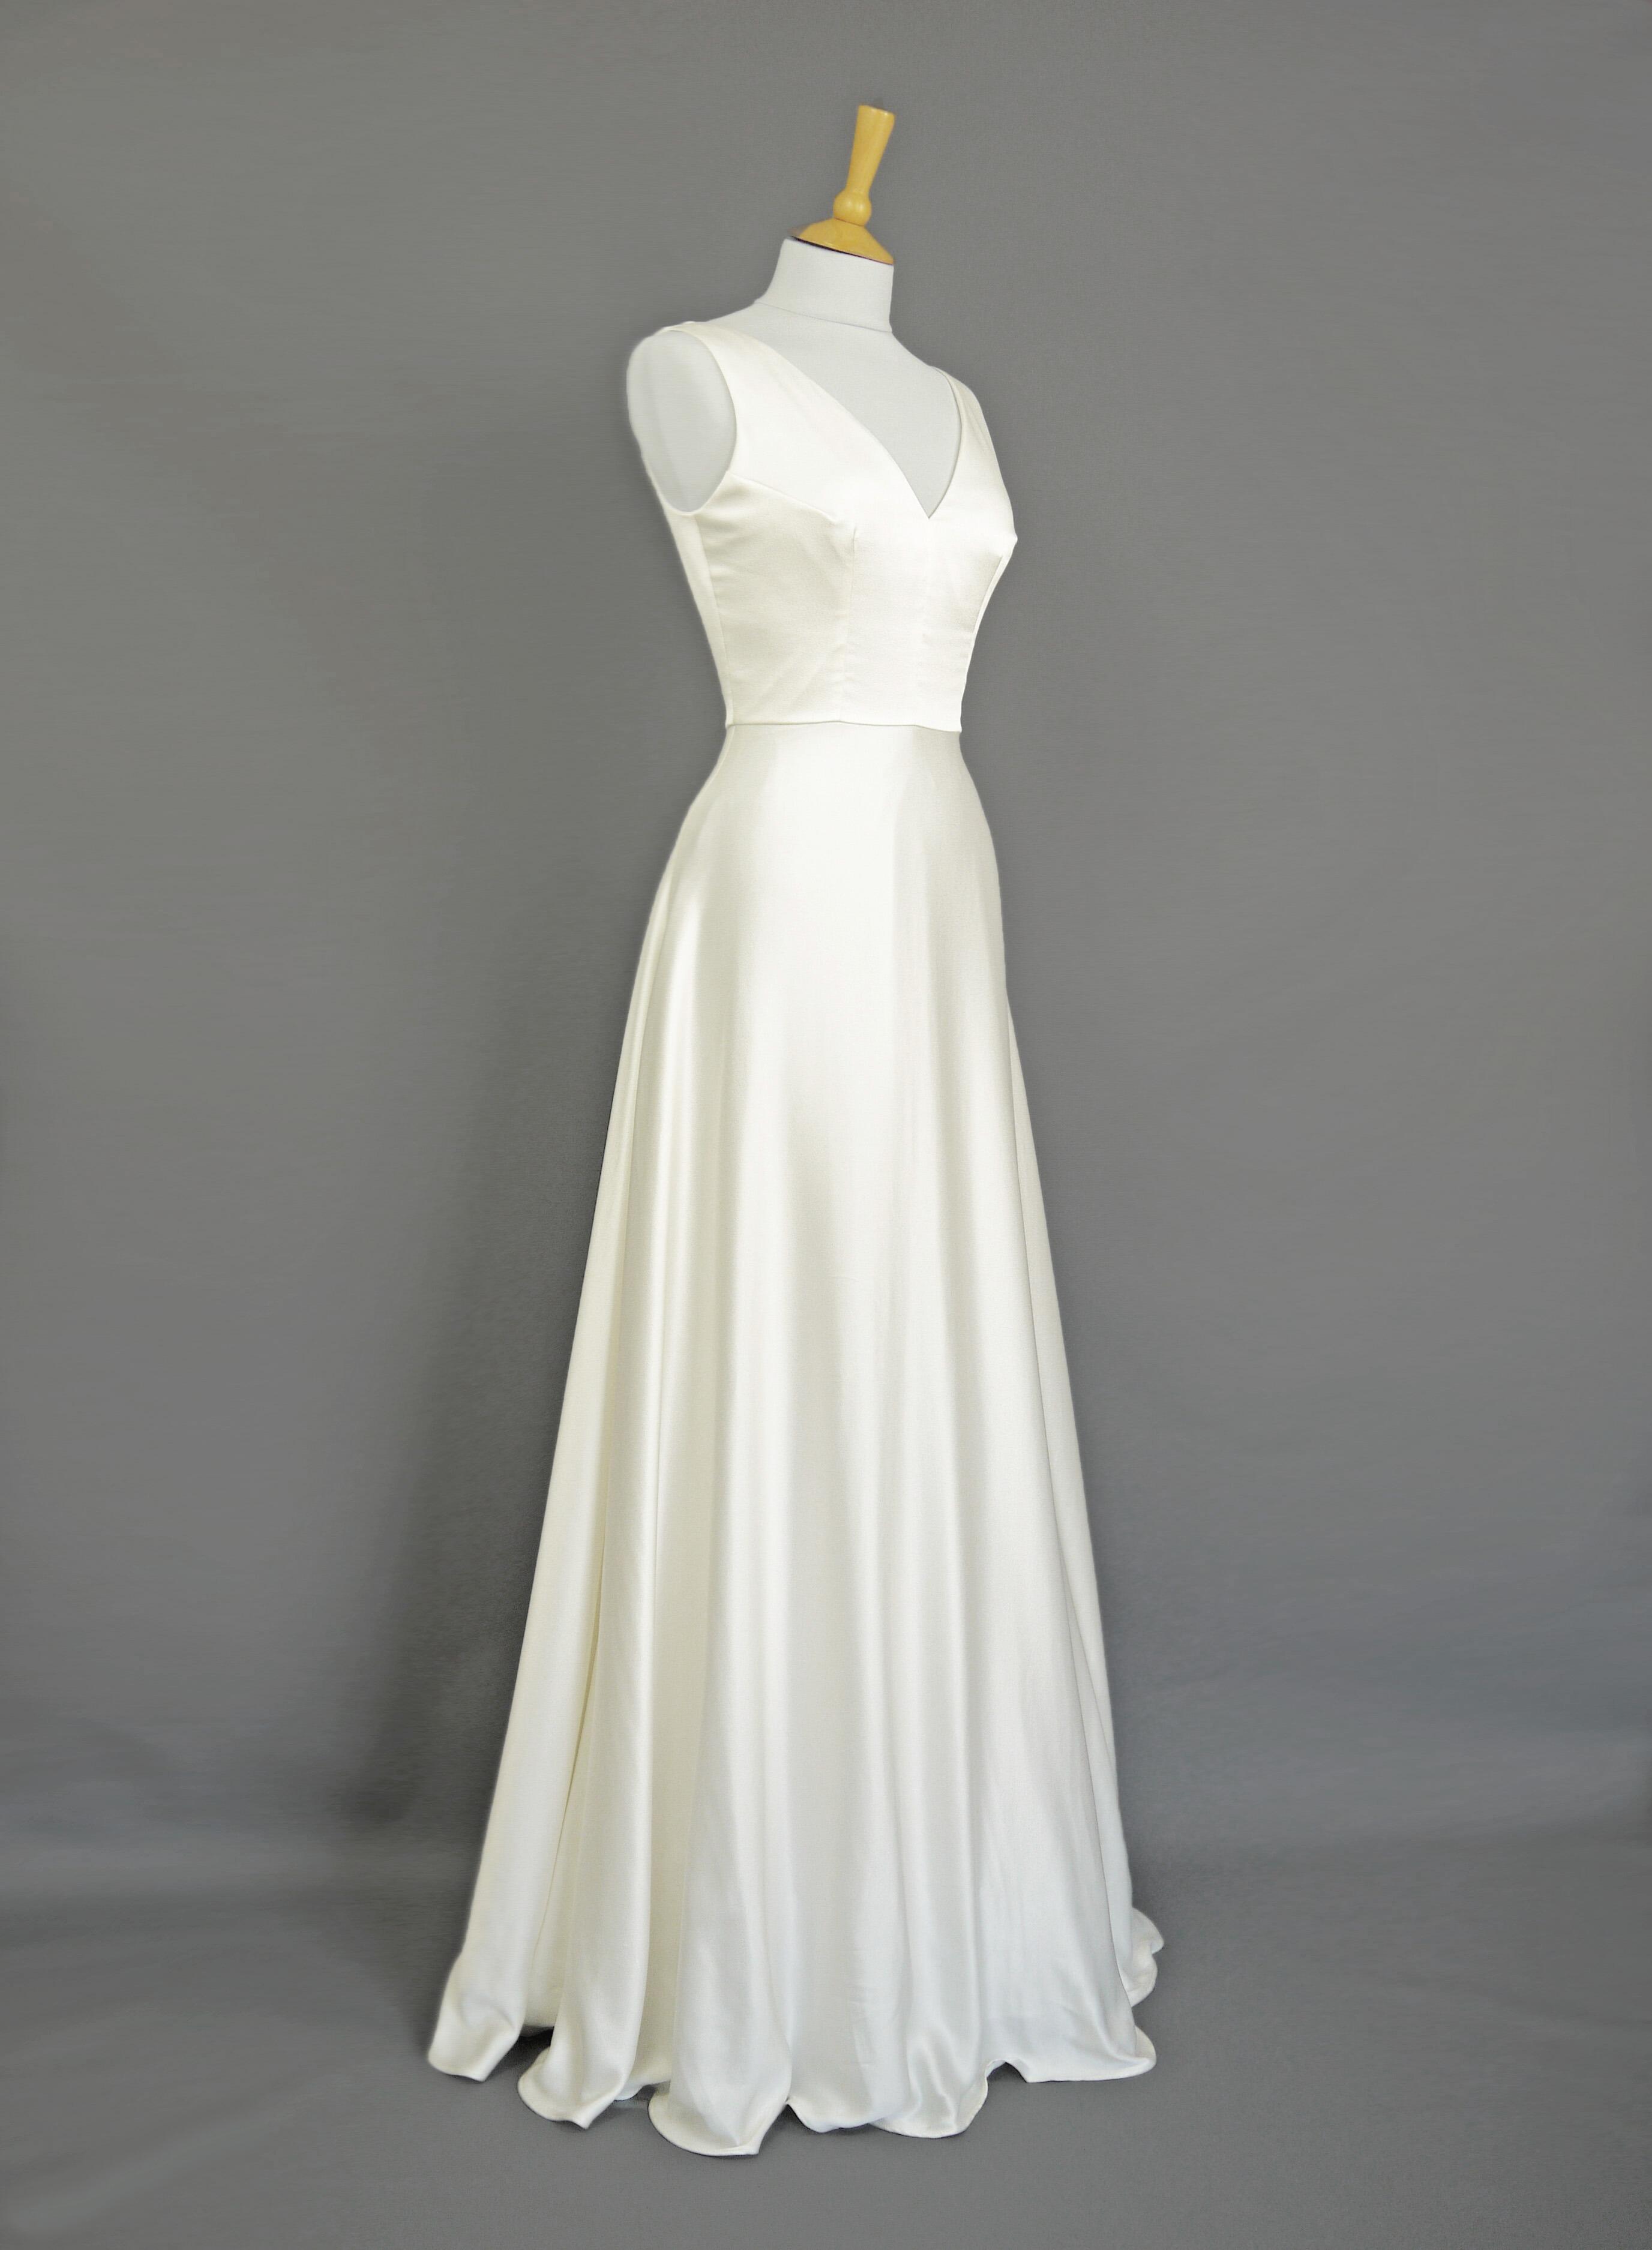 Coco 1920s Wedding Gown in Vintage Ivory Satin Crepe